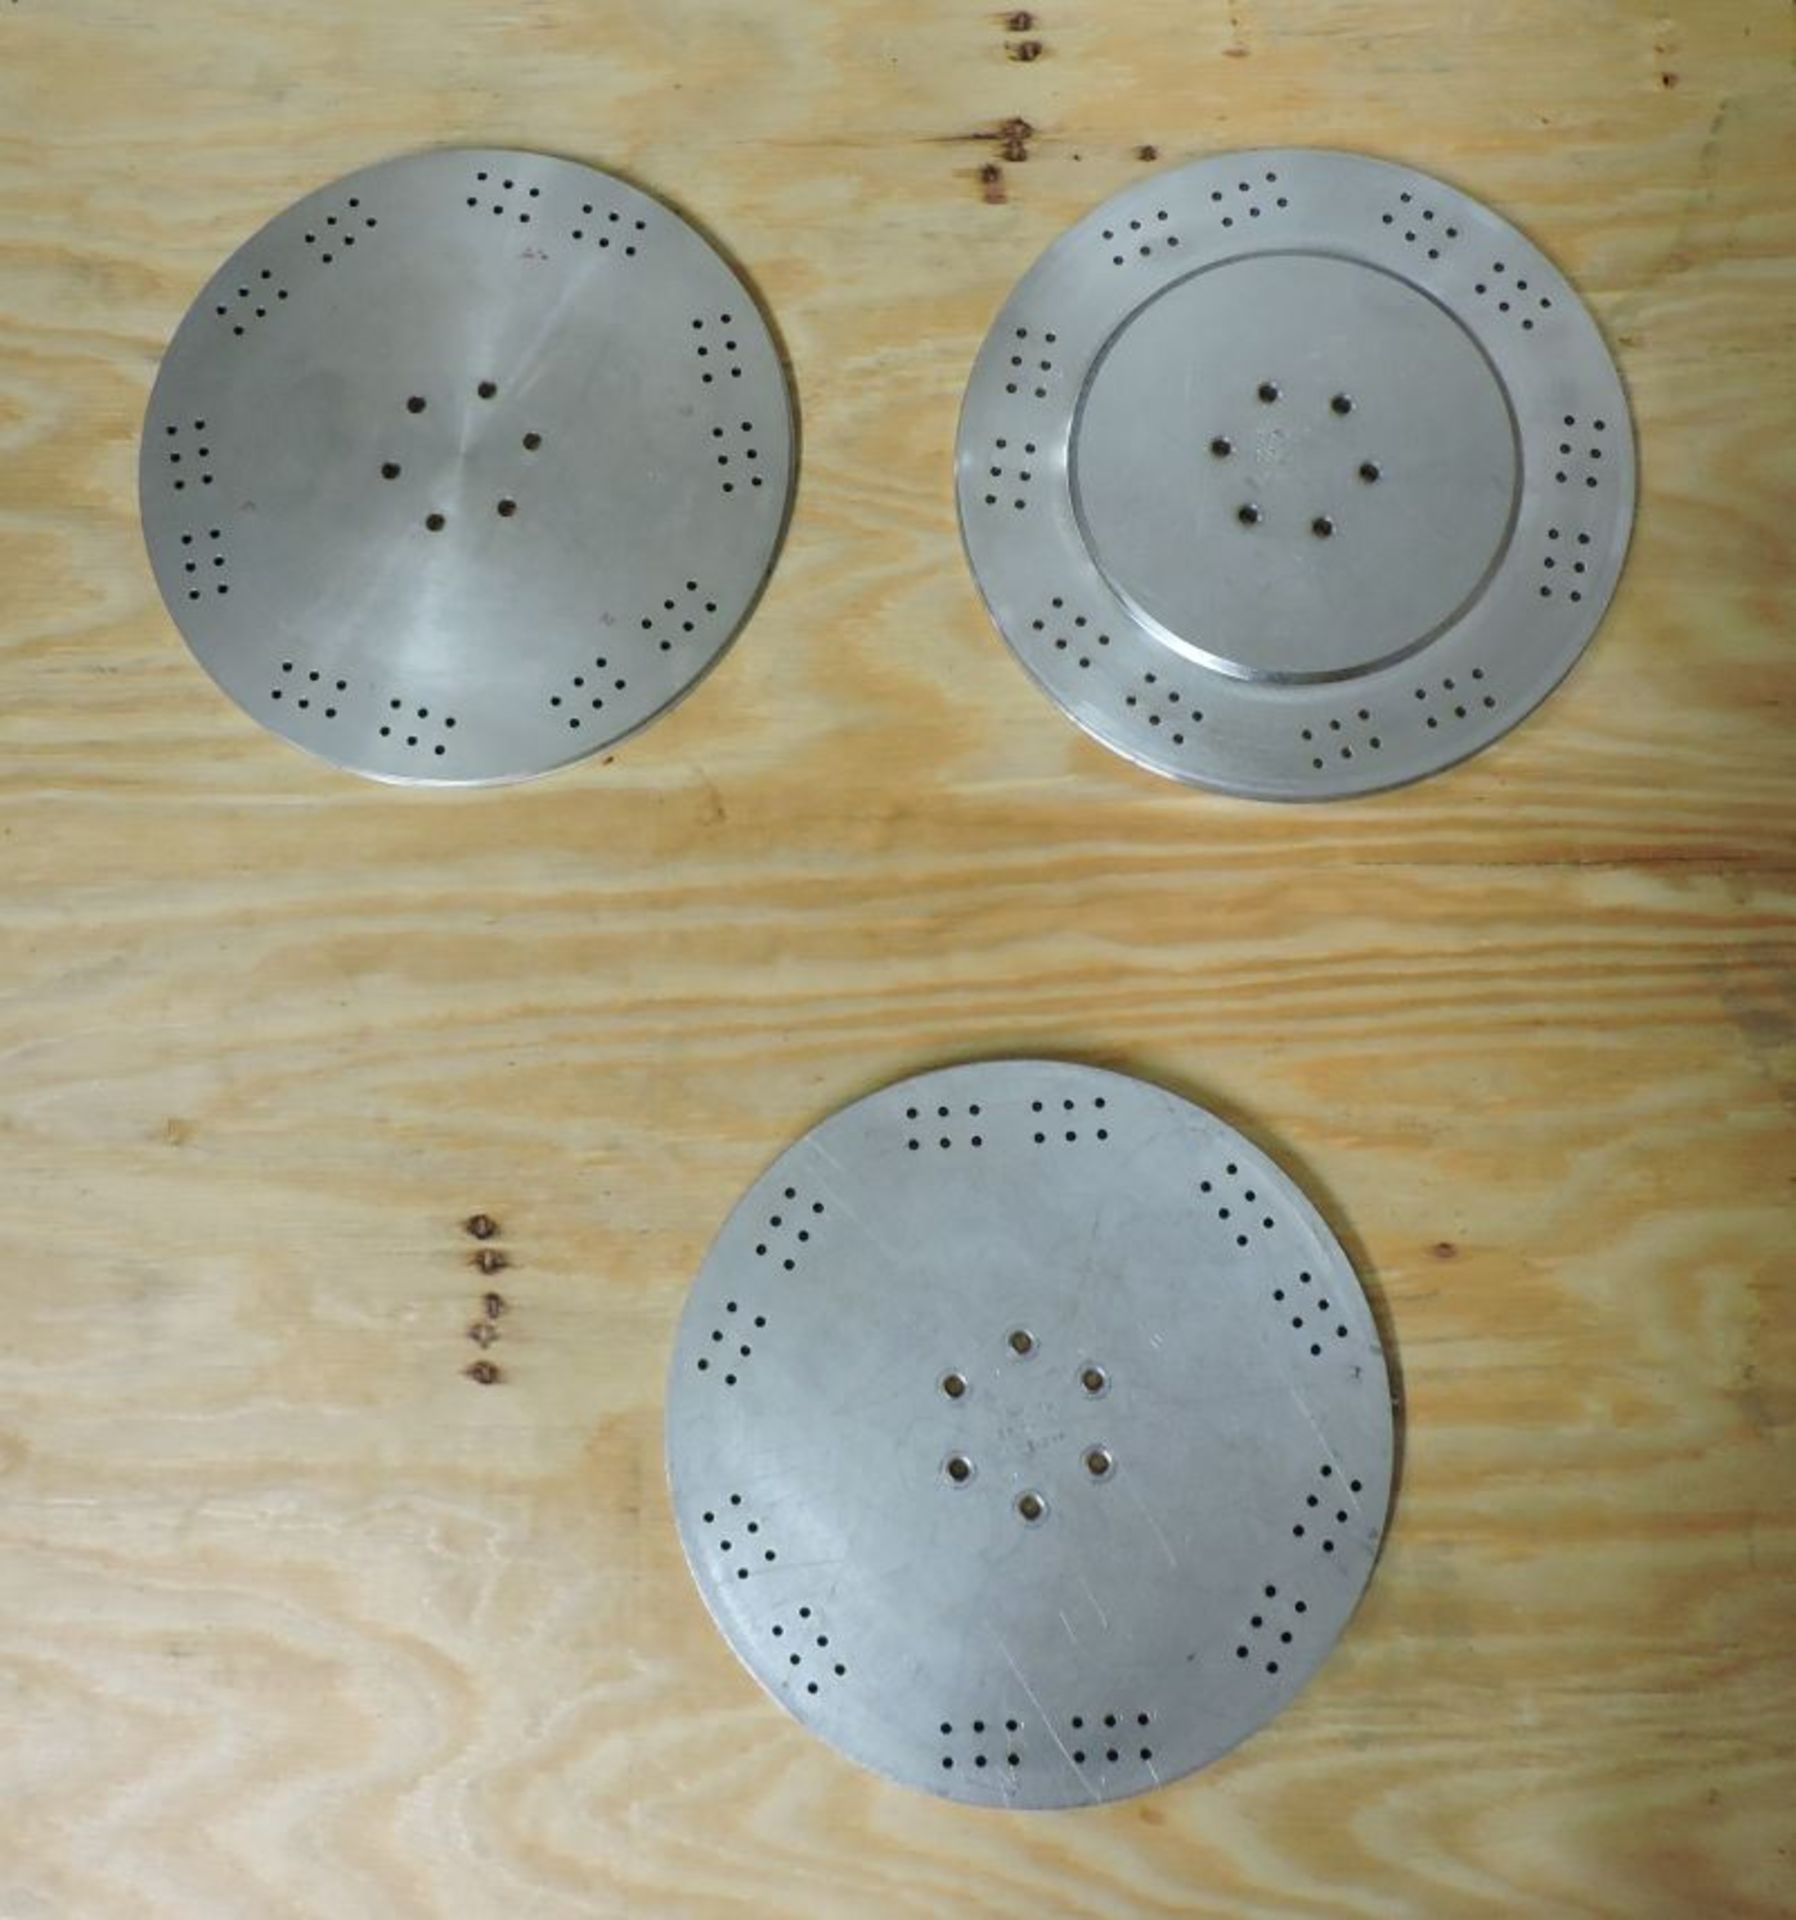 Bosch GKF 1200 or 1500 Partial Change Parts - NO RESERVE - Parts Include: Dosing Discs: Size 2 ( - Image 11 of 11